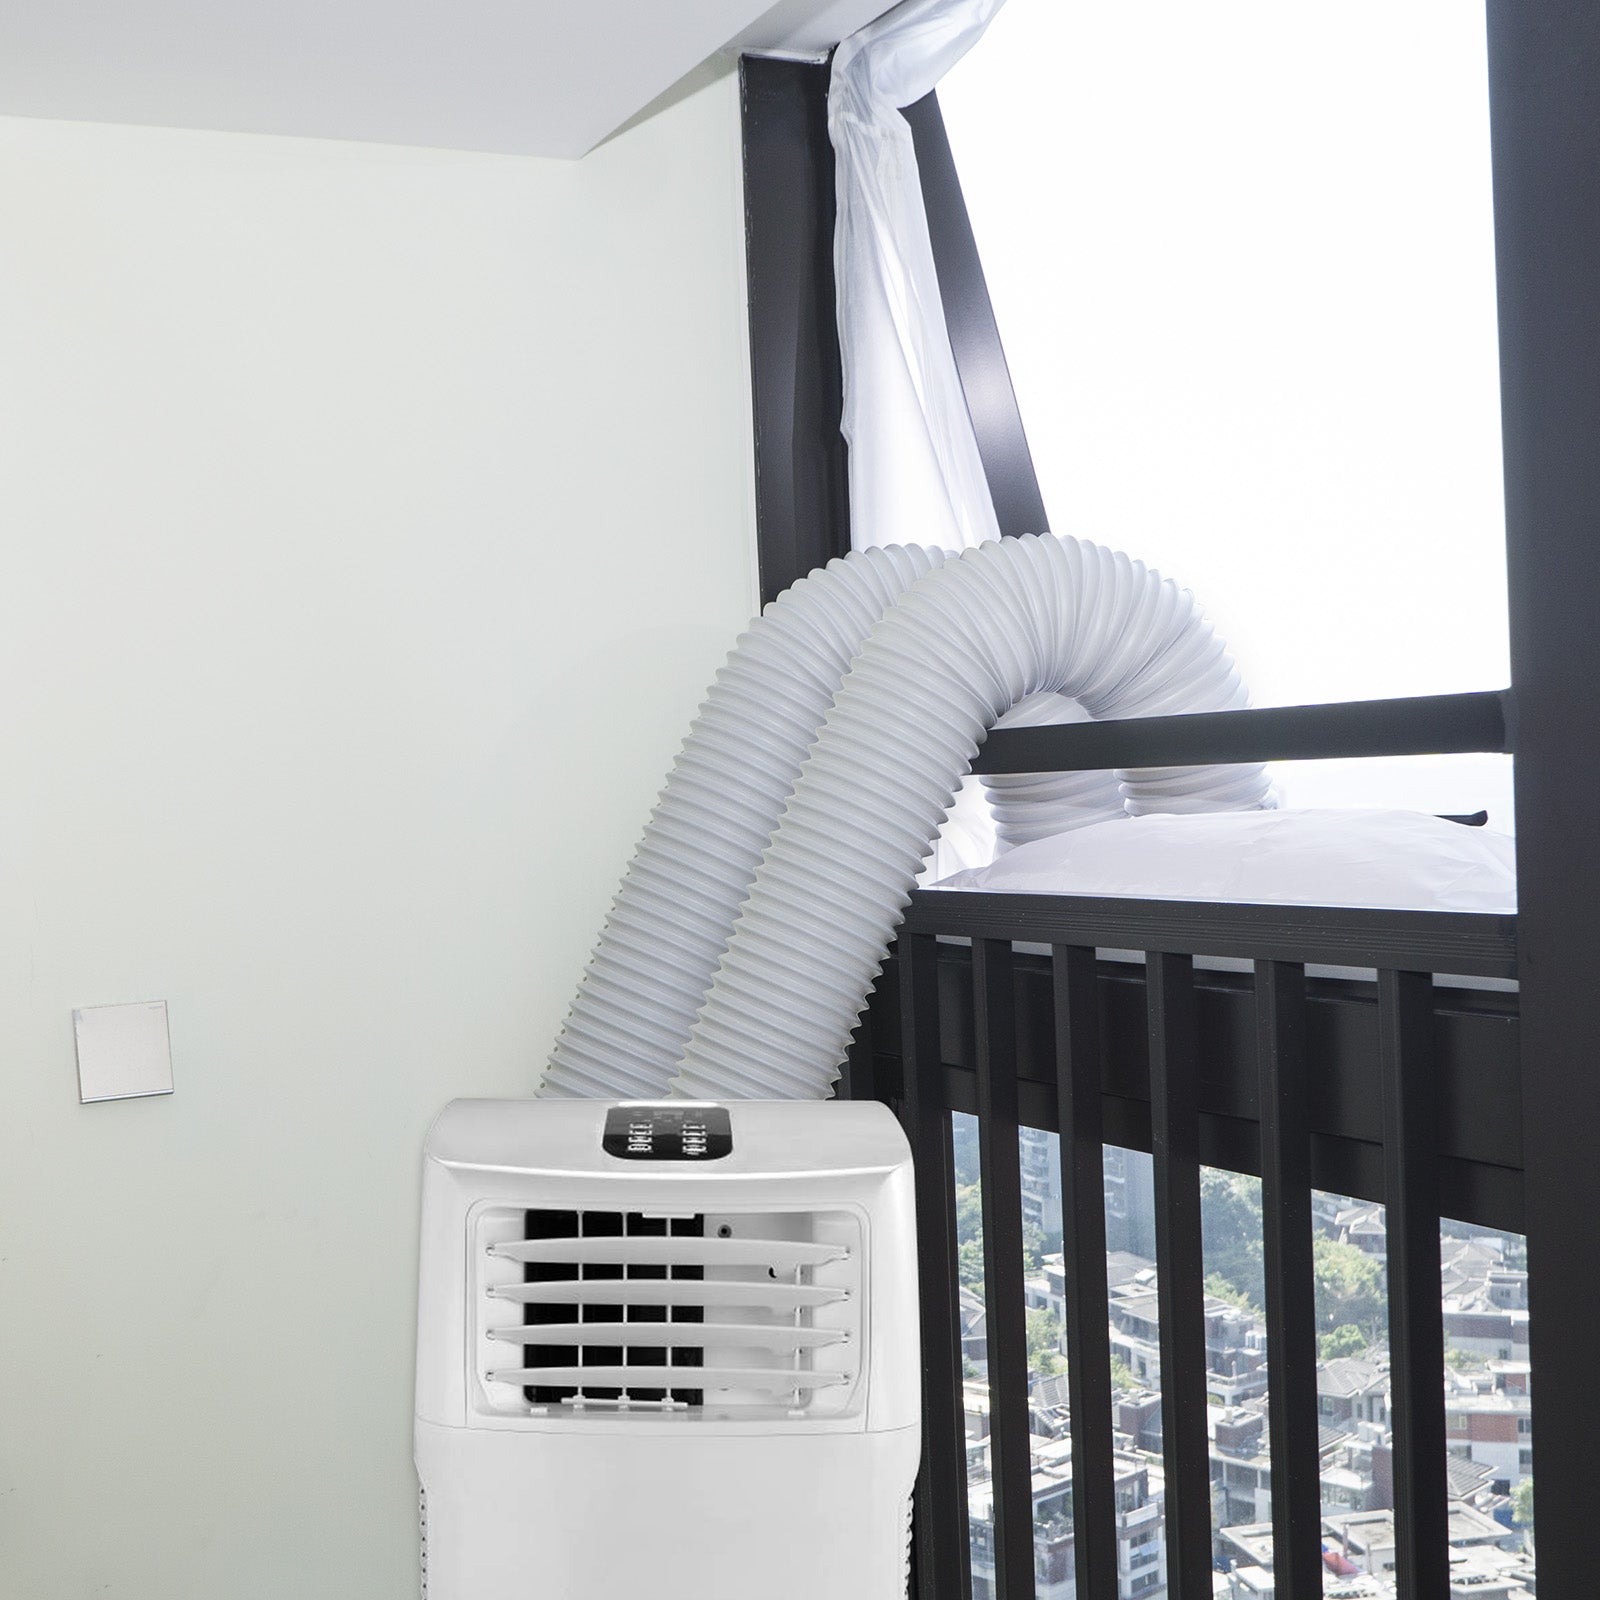 7 Tips to Get the Most Out of your Portable Air Conditioner